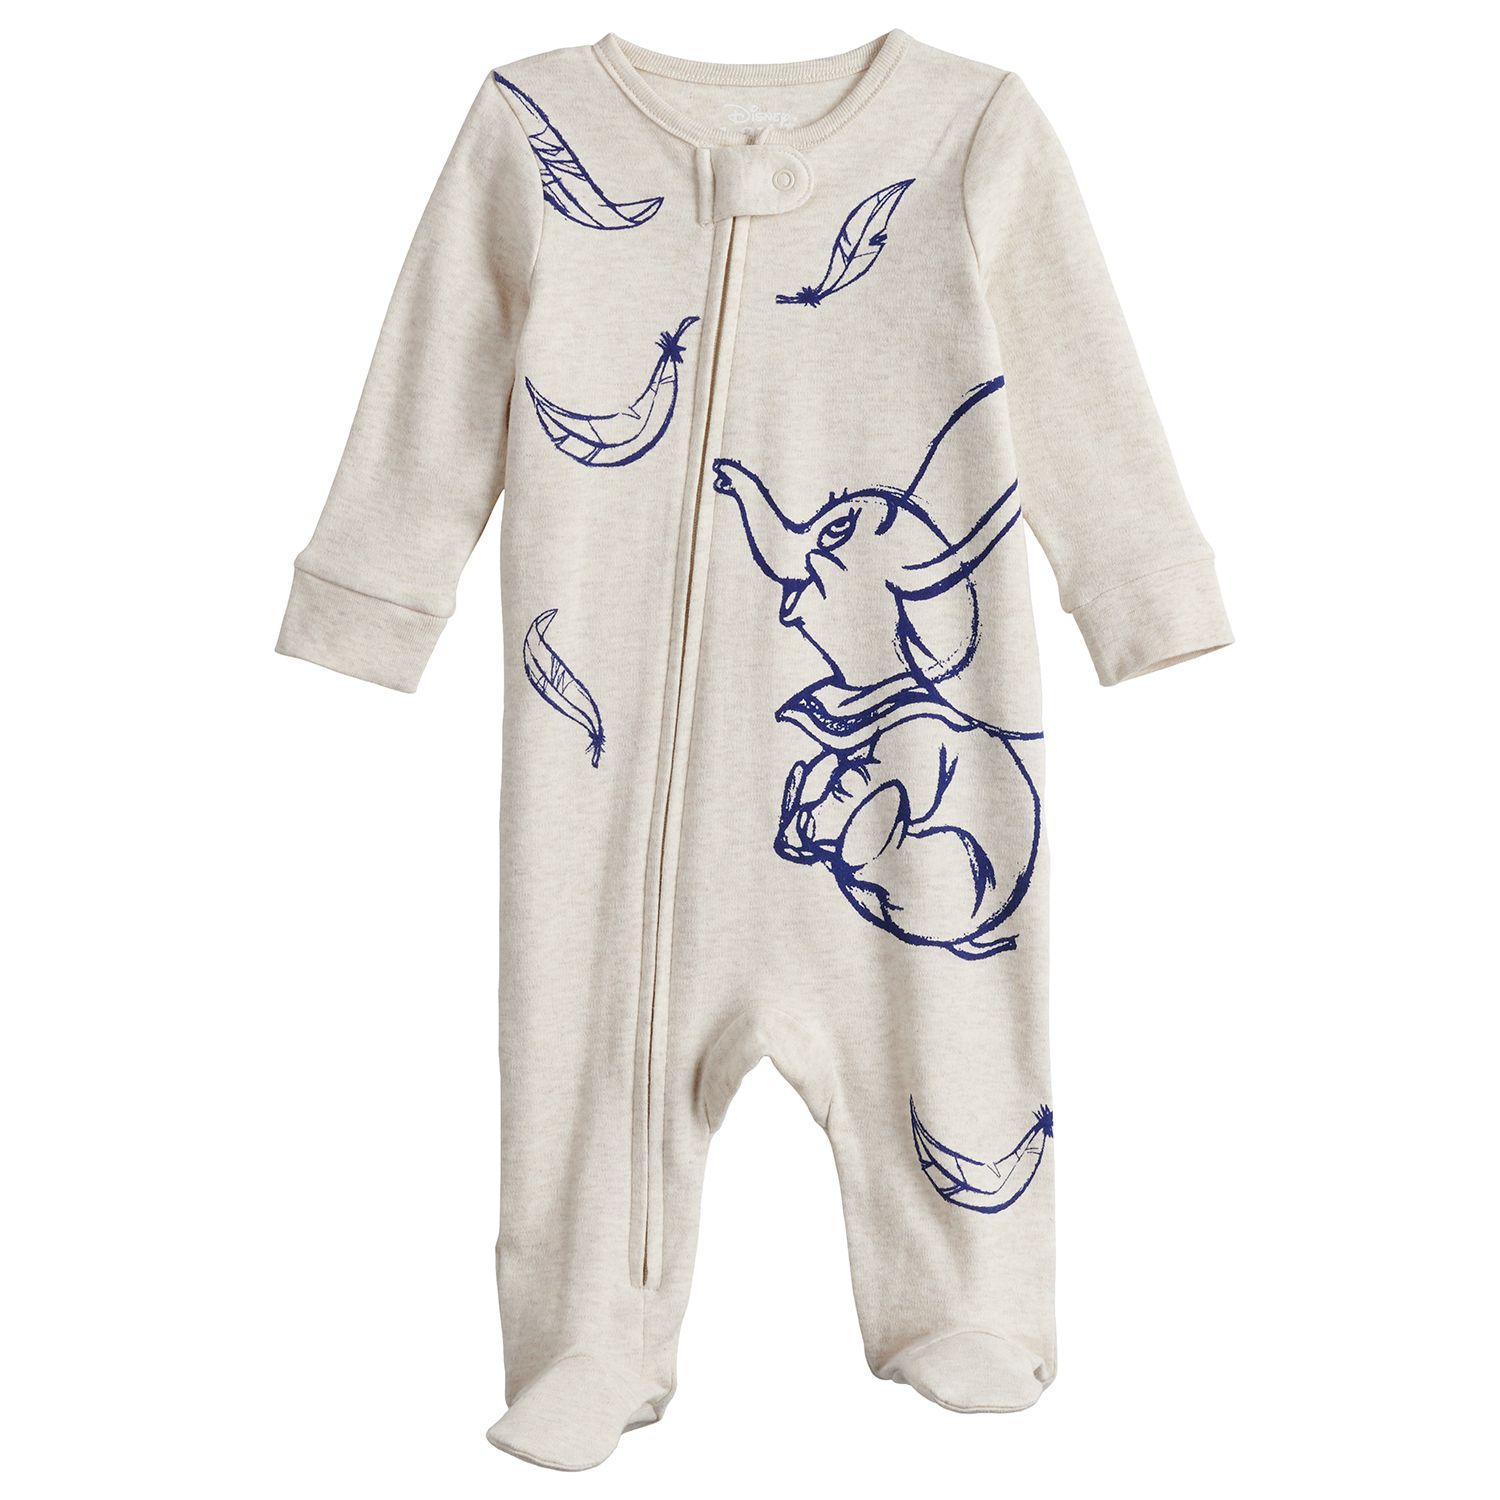 dumbo baby outfit